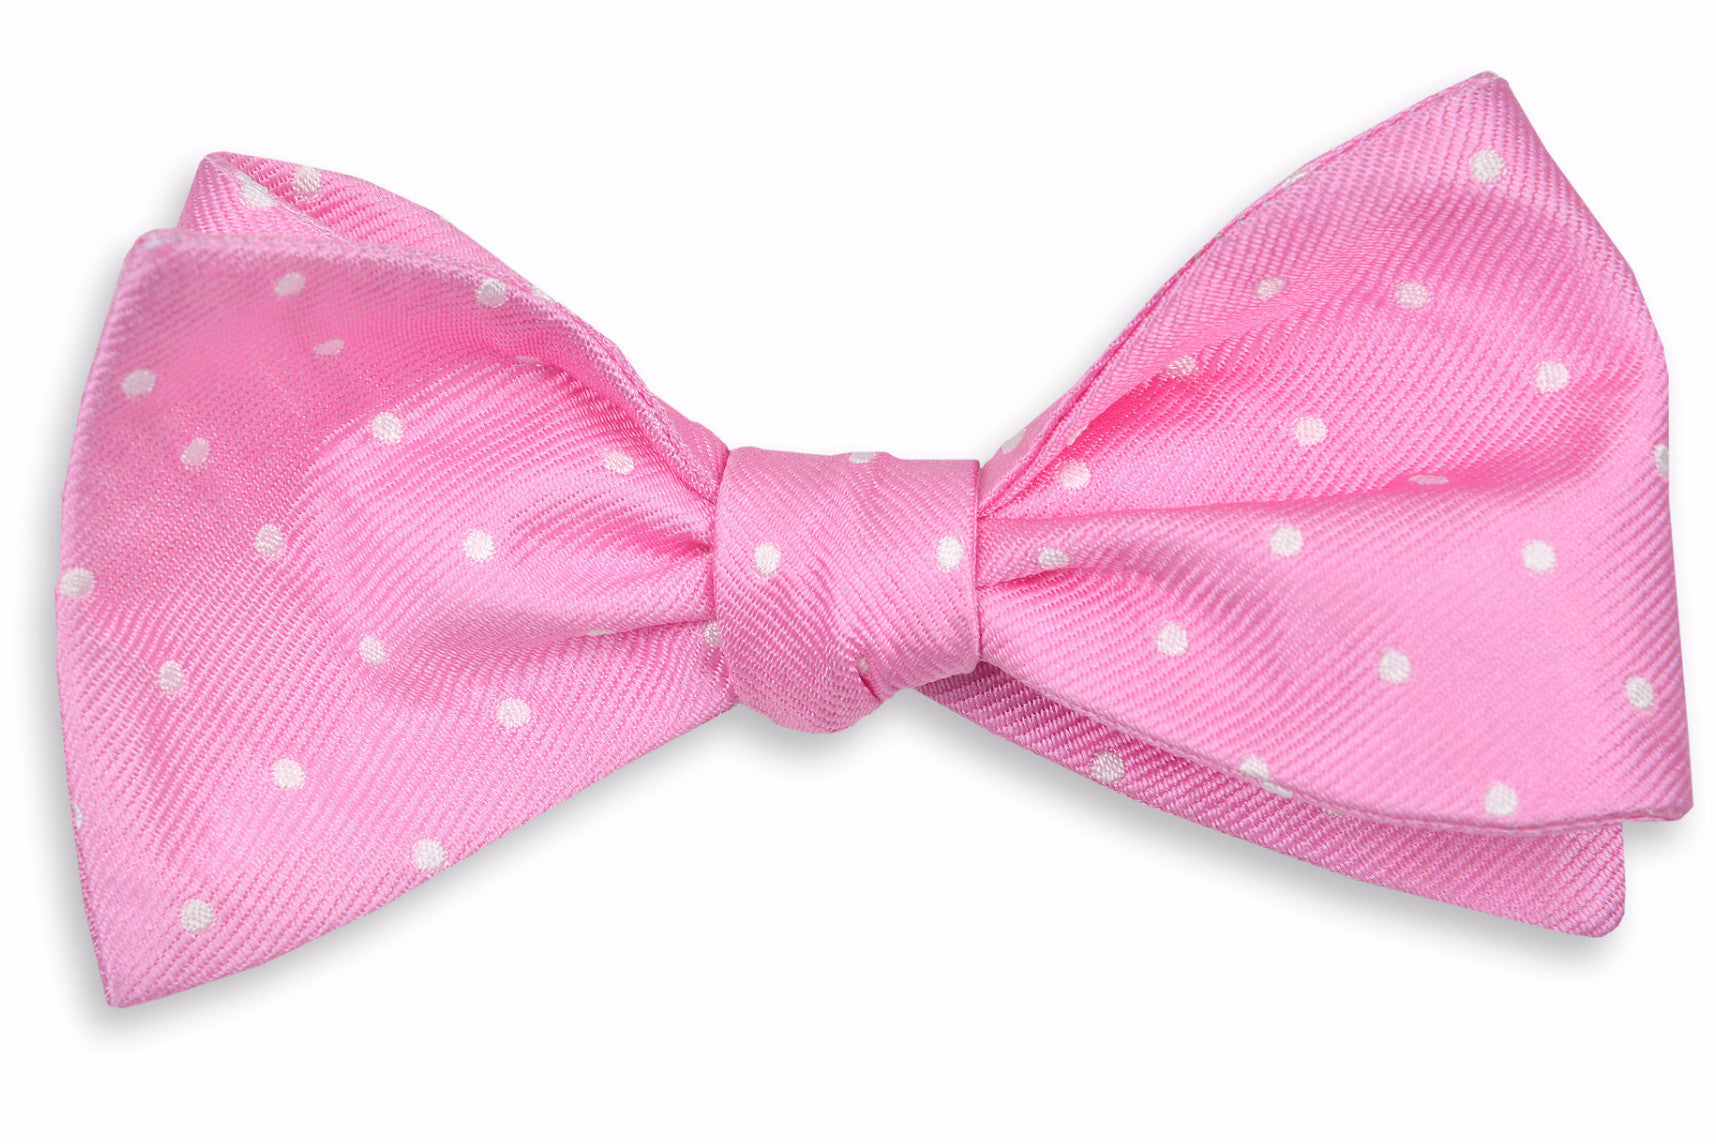 Men's pink bow tie. Made from 100% silk featuring white polka dots.